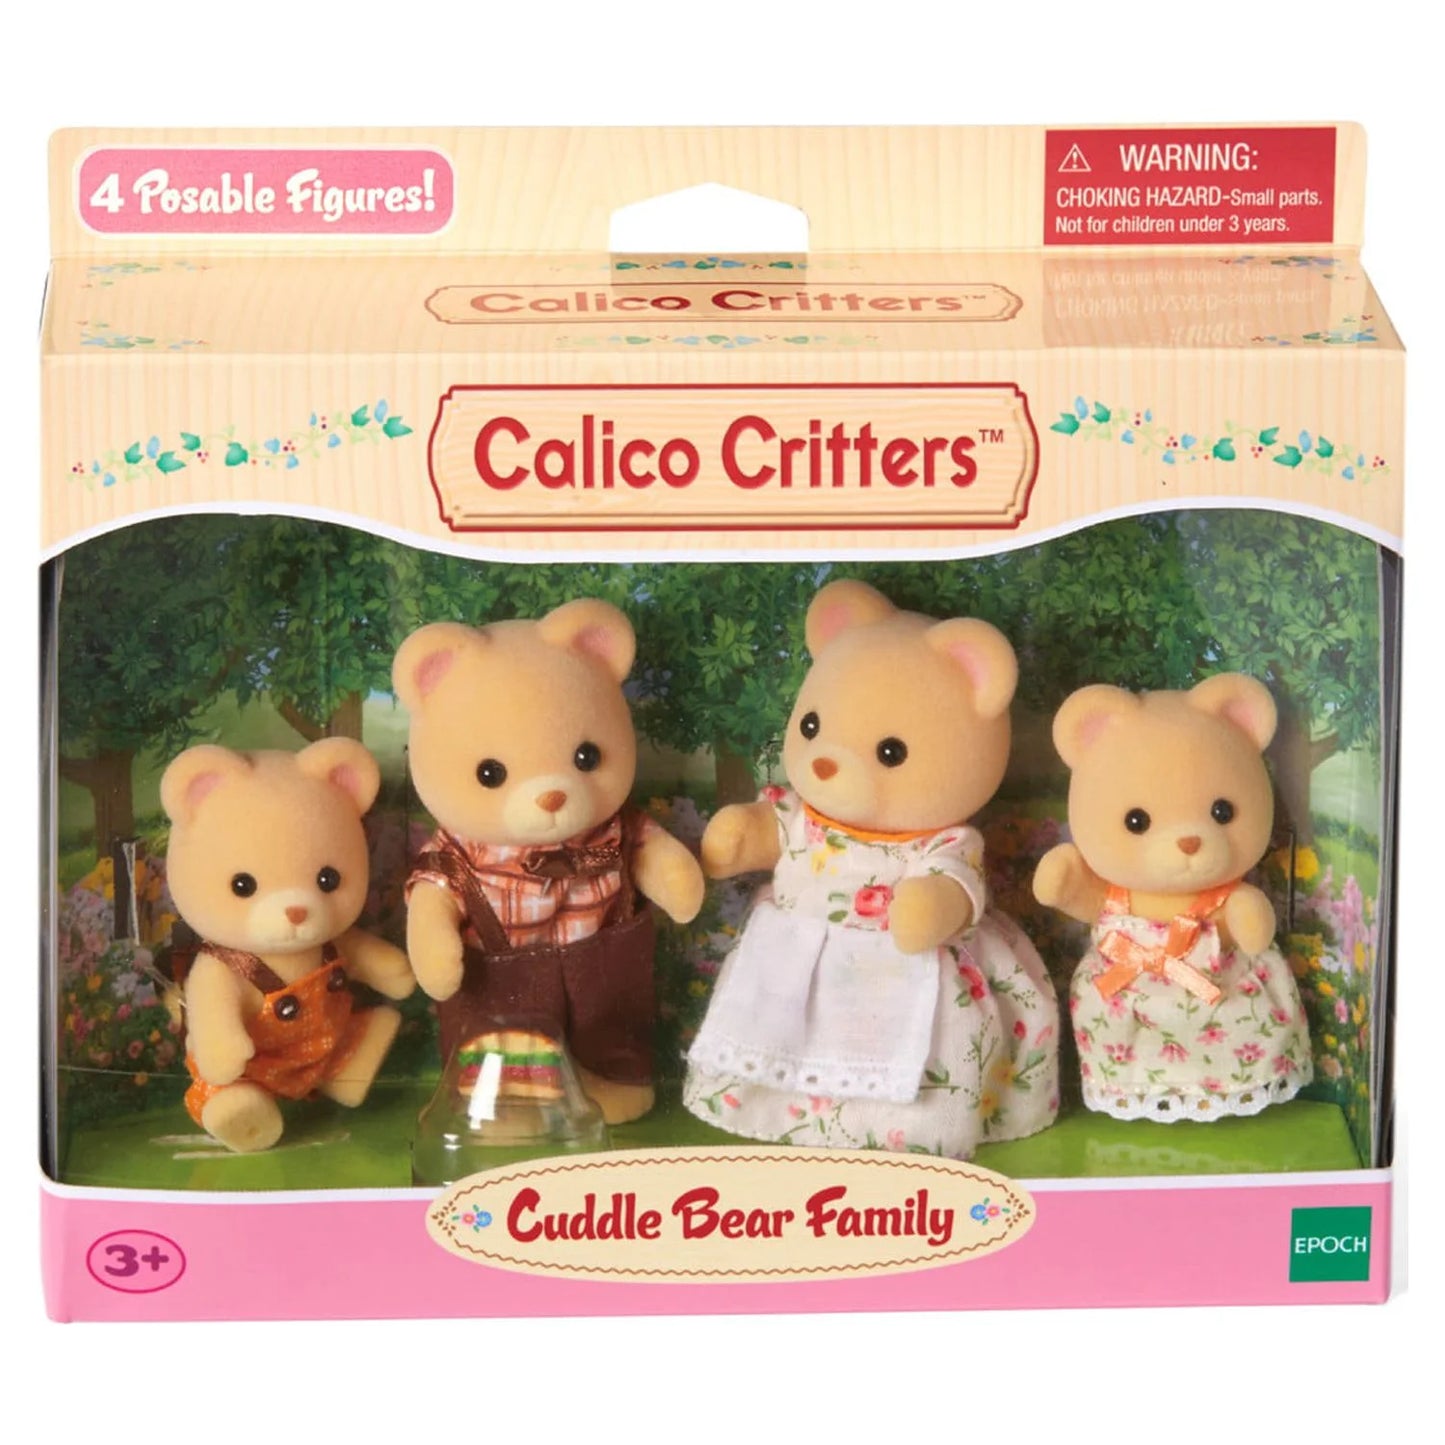 CALICO CRITTERS CUDDLE BEAR FAMILY